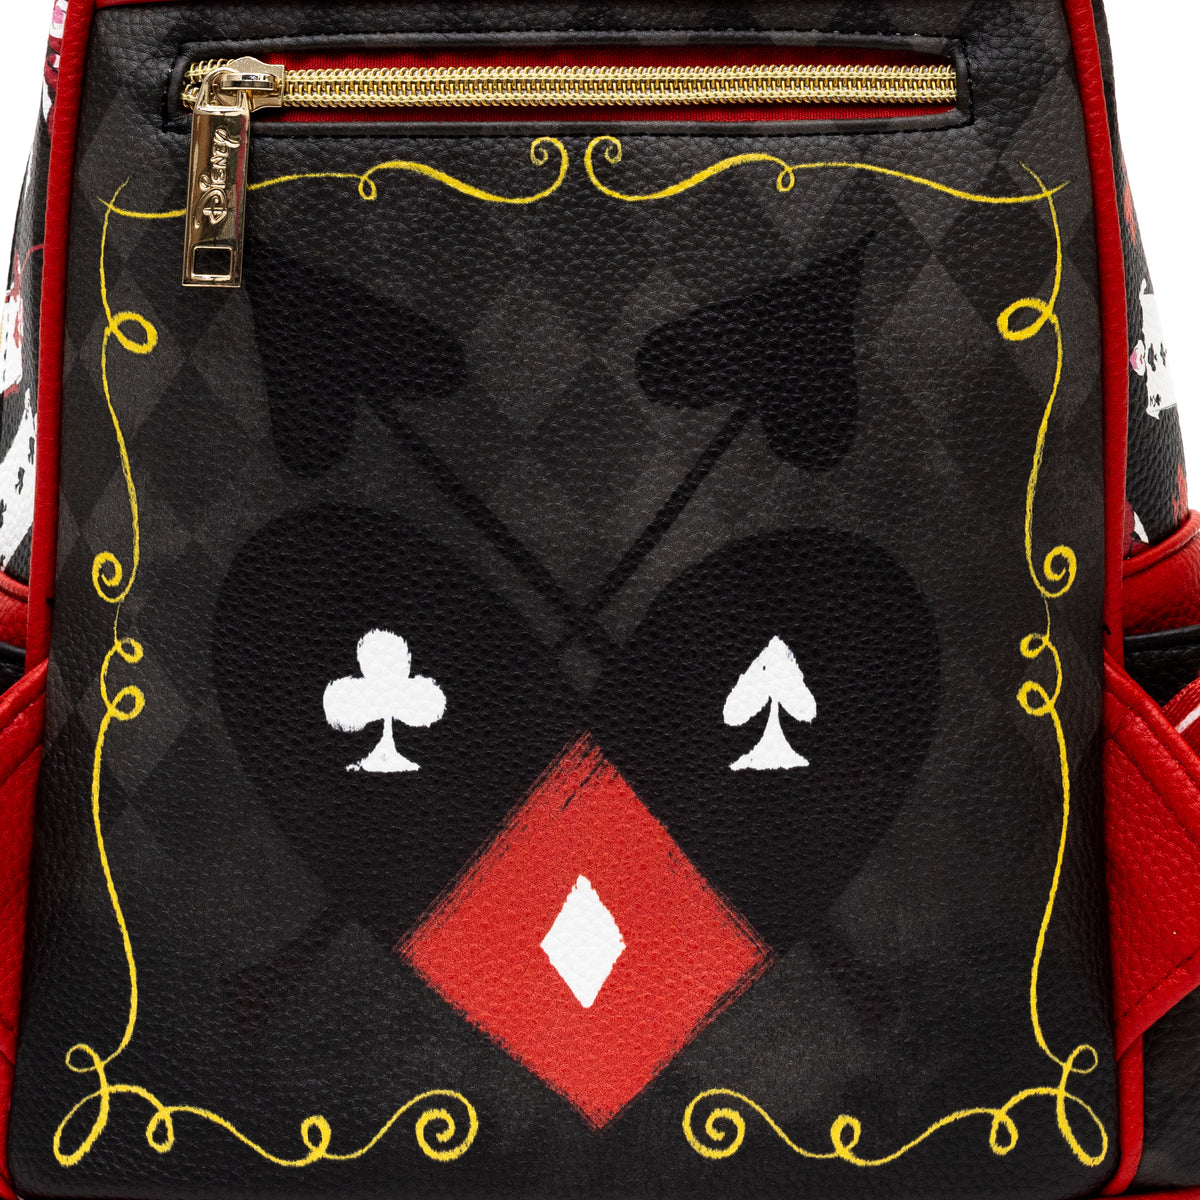 WondaPOP LUXE - Disney Mini Backpack Villains Queen of Hearts Limited Edition